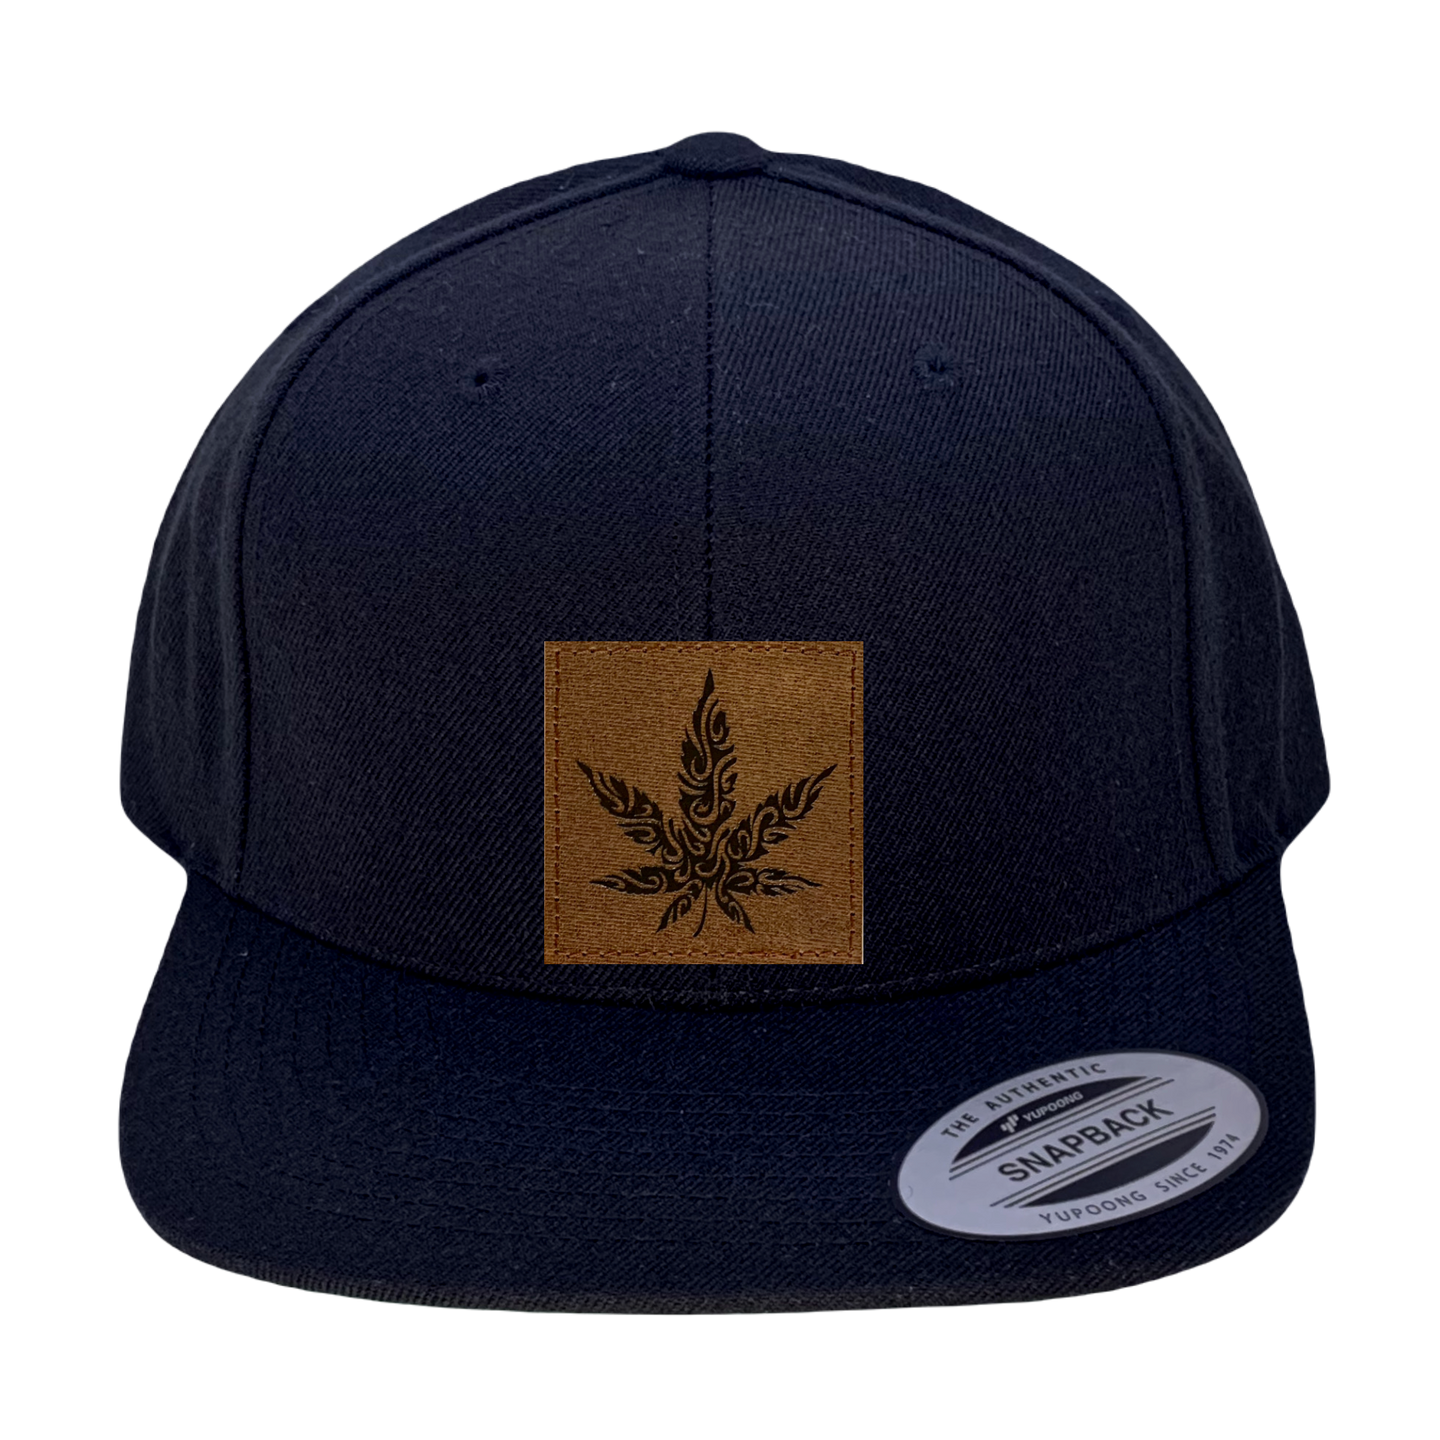 Yupoong 6089 Flat Bill, Hat / Visor with Green Under Bill and Handmade Vegan Leather Brown and White Cannabis Patch by Buddha Gear.